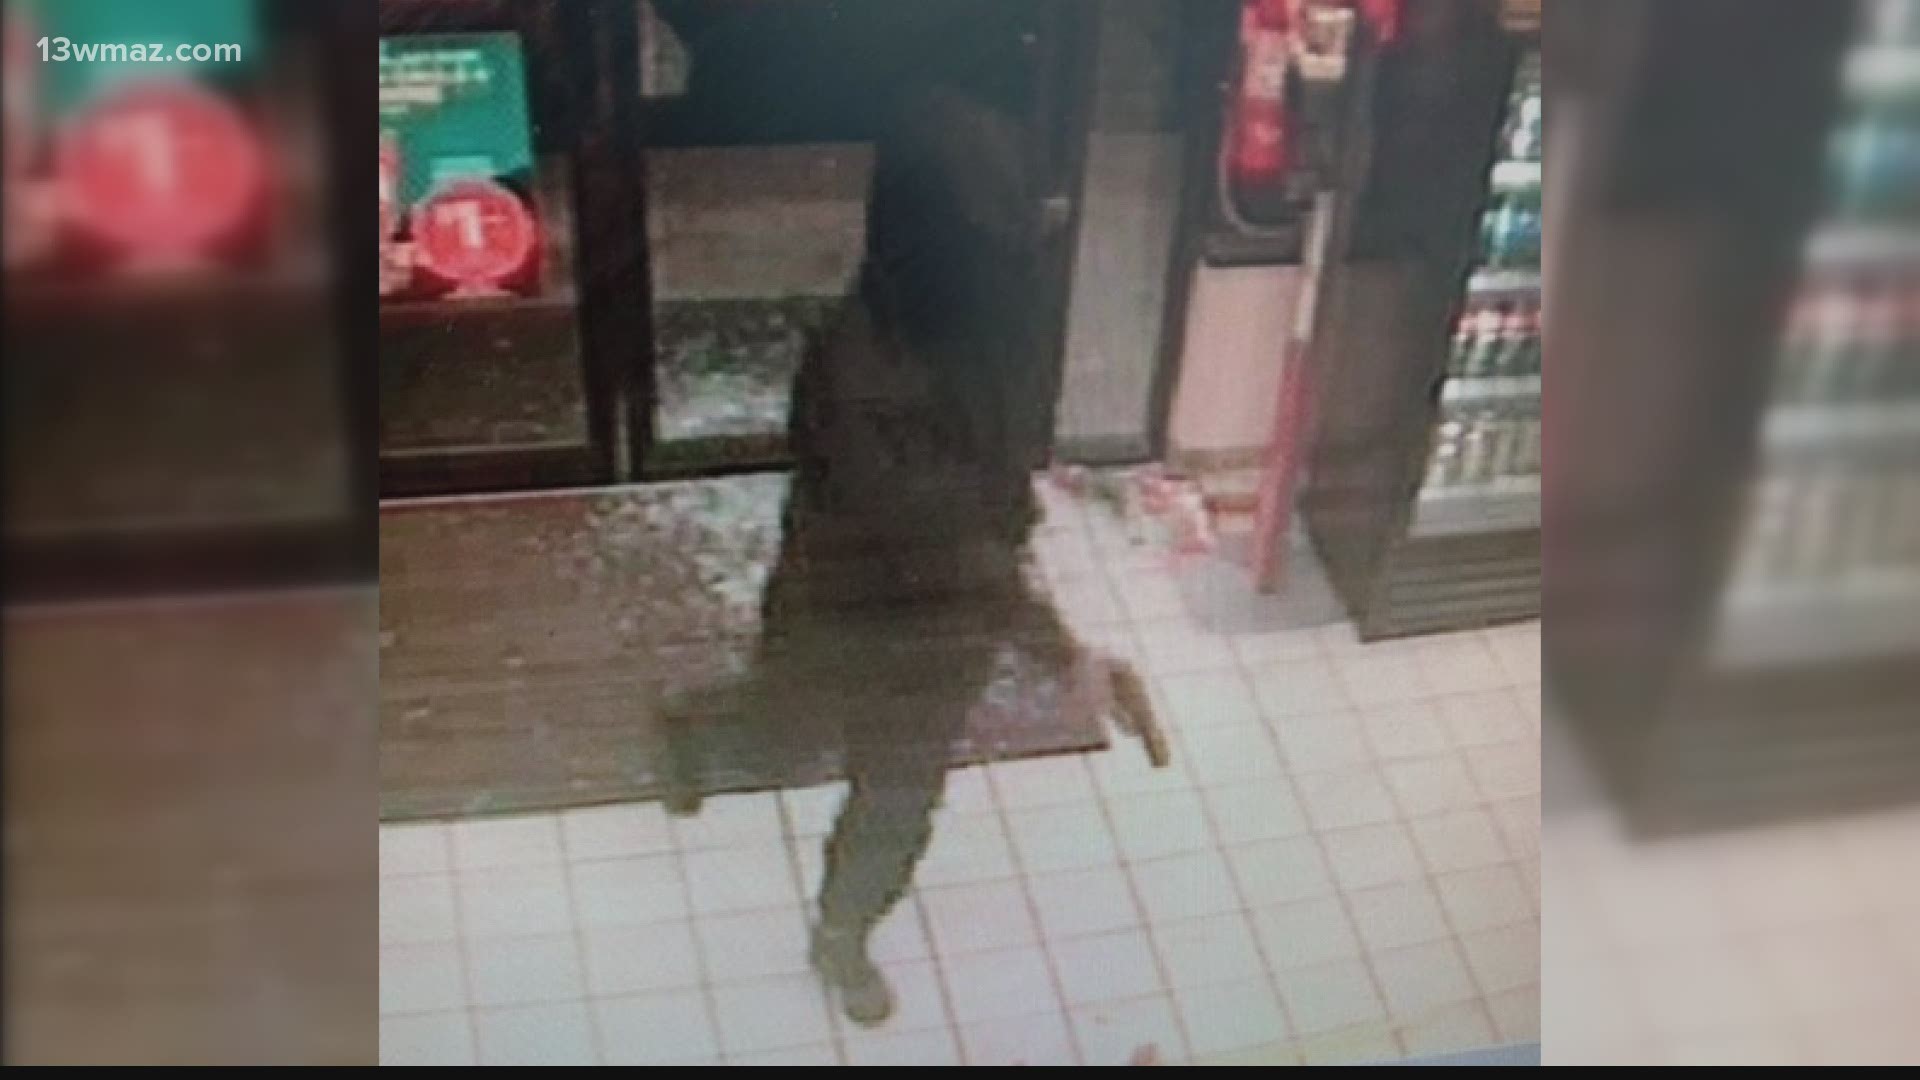 A man threw a brick through the glass of the convenience store's locked door, ran inside, and demanded cash.